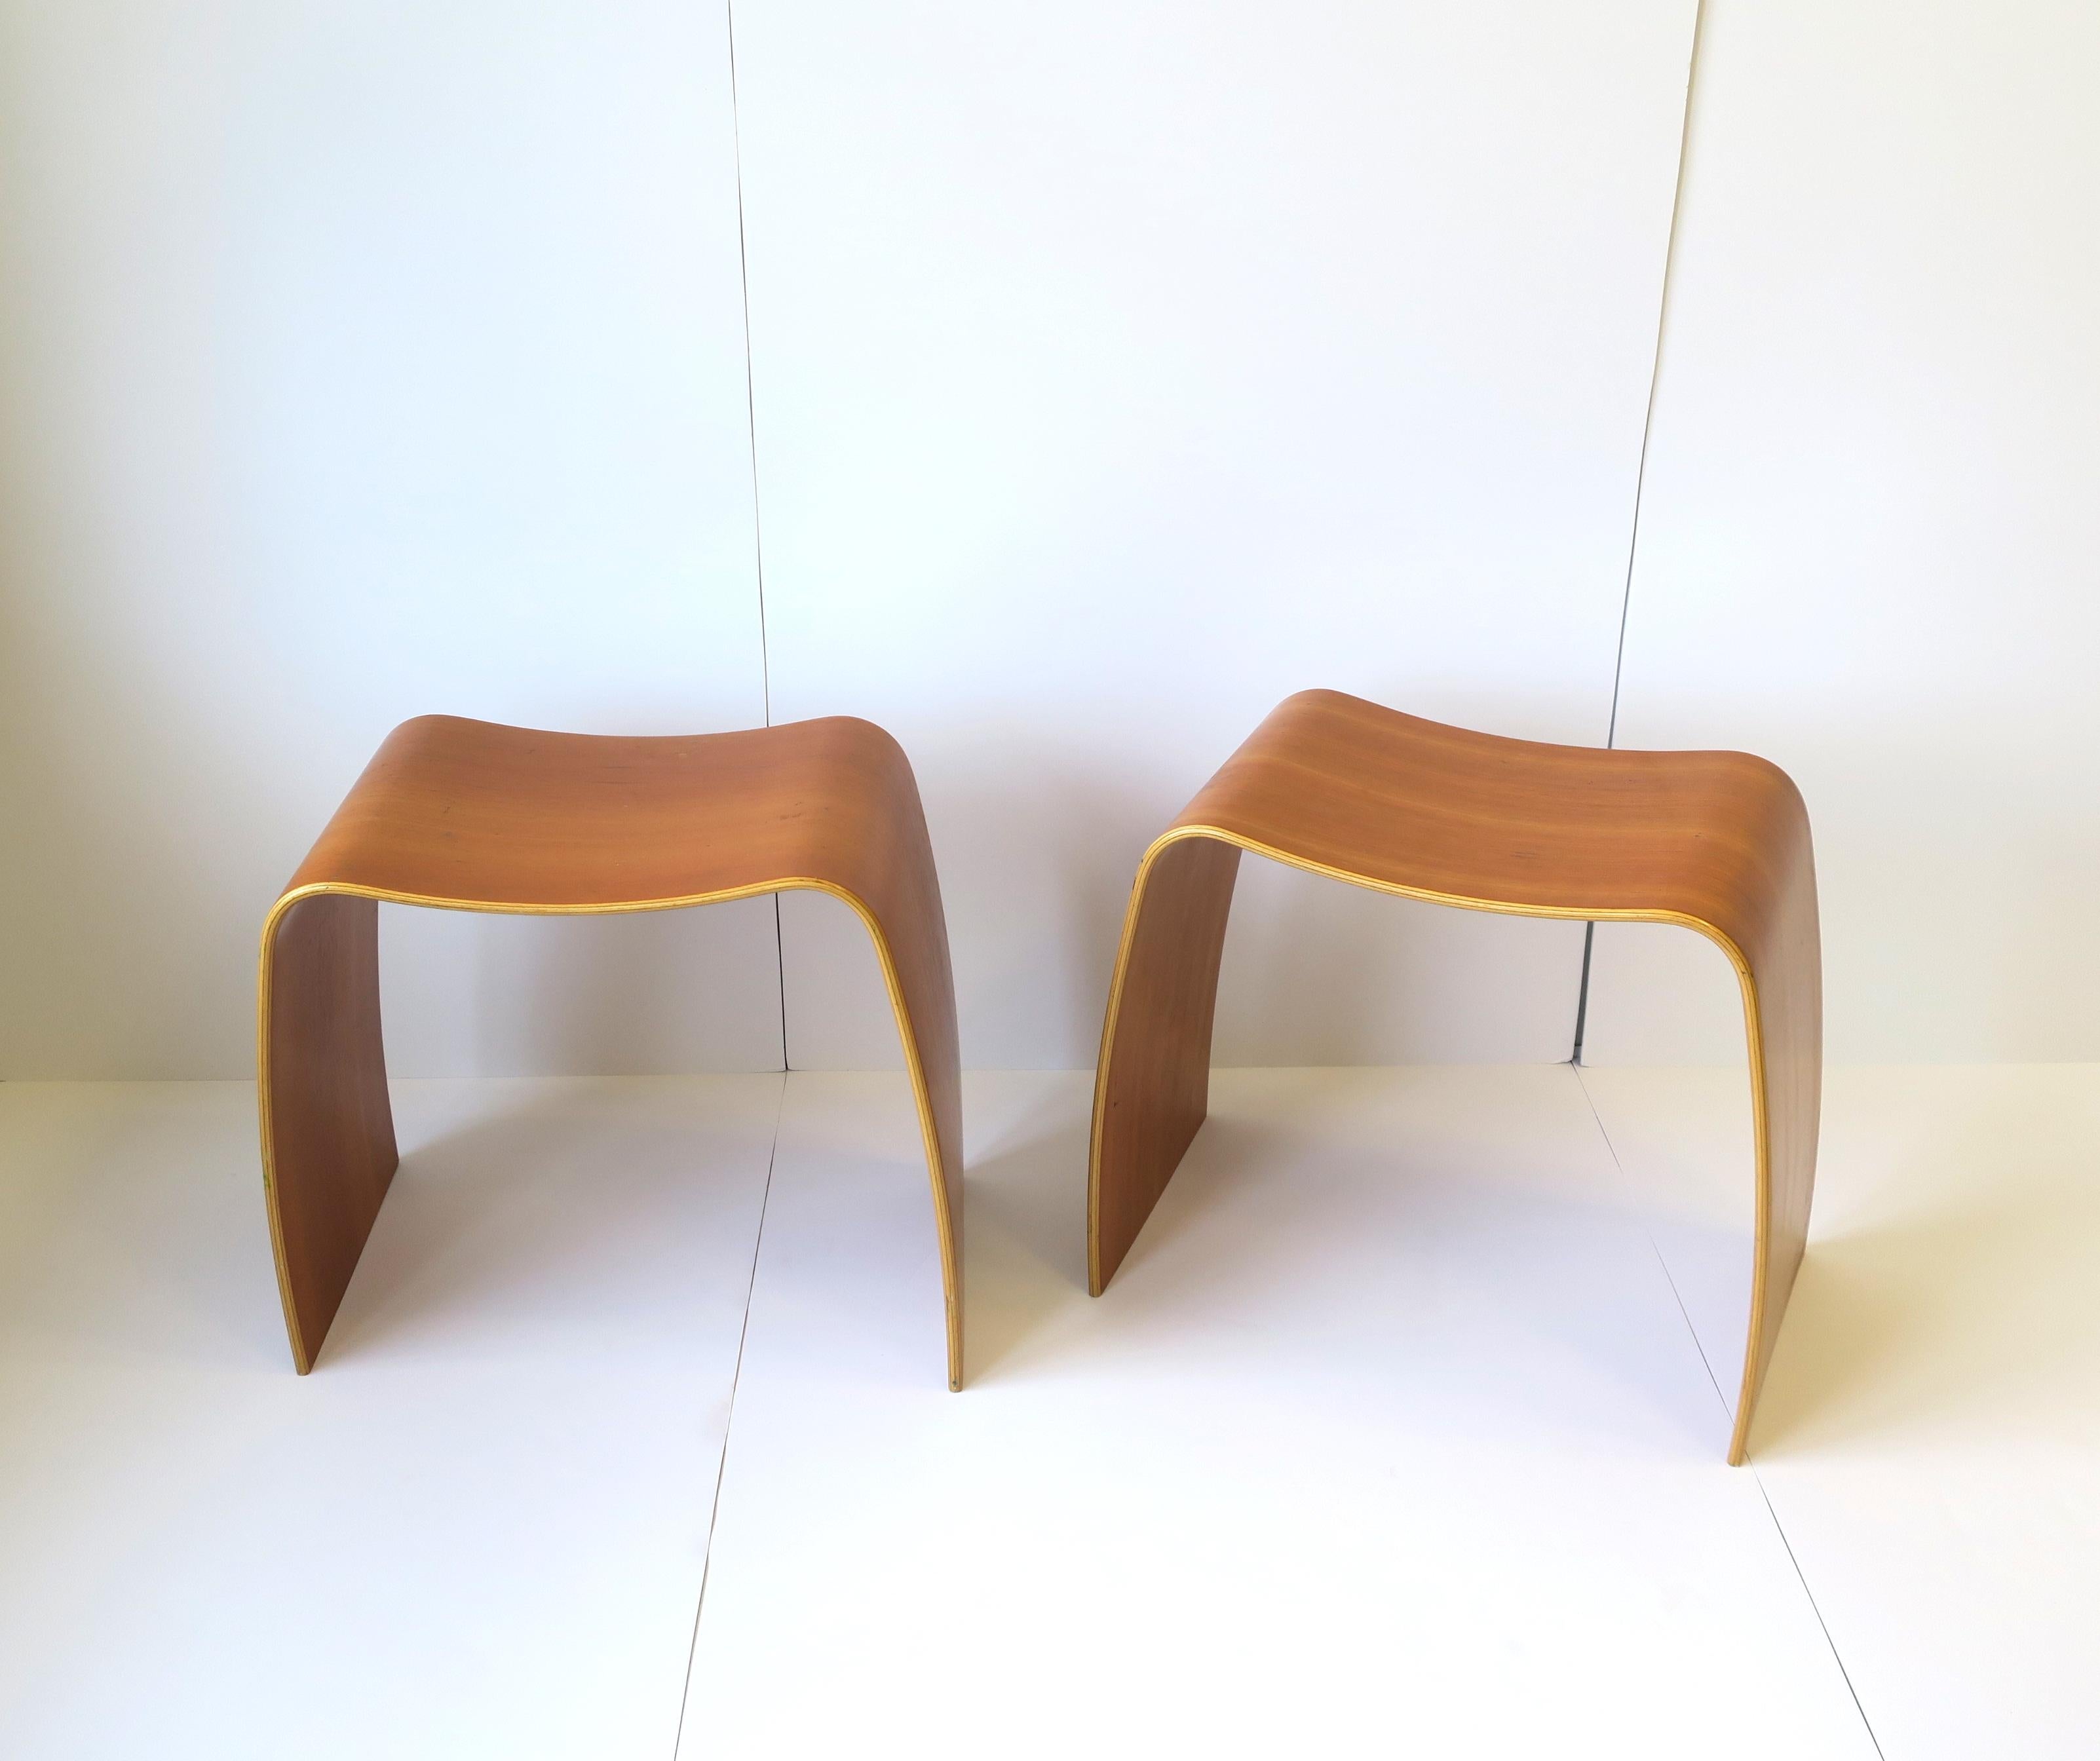 A pair of Jørgen Møller M-Stool's. A pair of contemporary modern Minimalist cherry wood seating benches or stools designed by Danish designer Jørgen Møller, 20th century, carried by Danish furniture company Askman, Denmark, circa early-21st century,